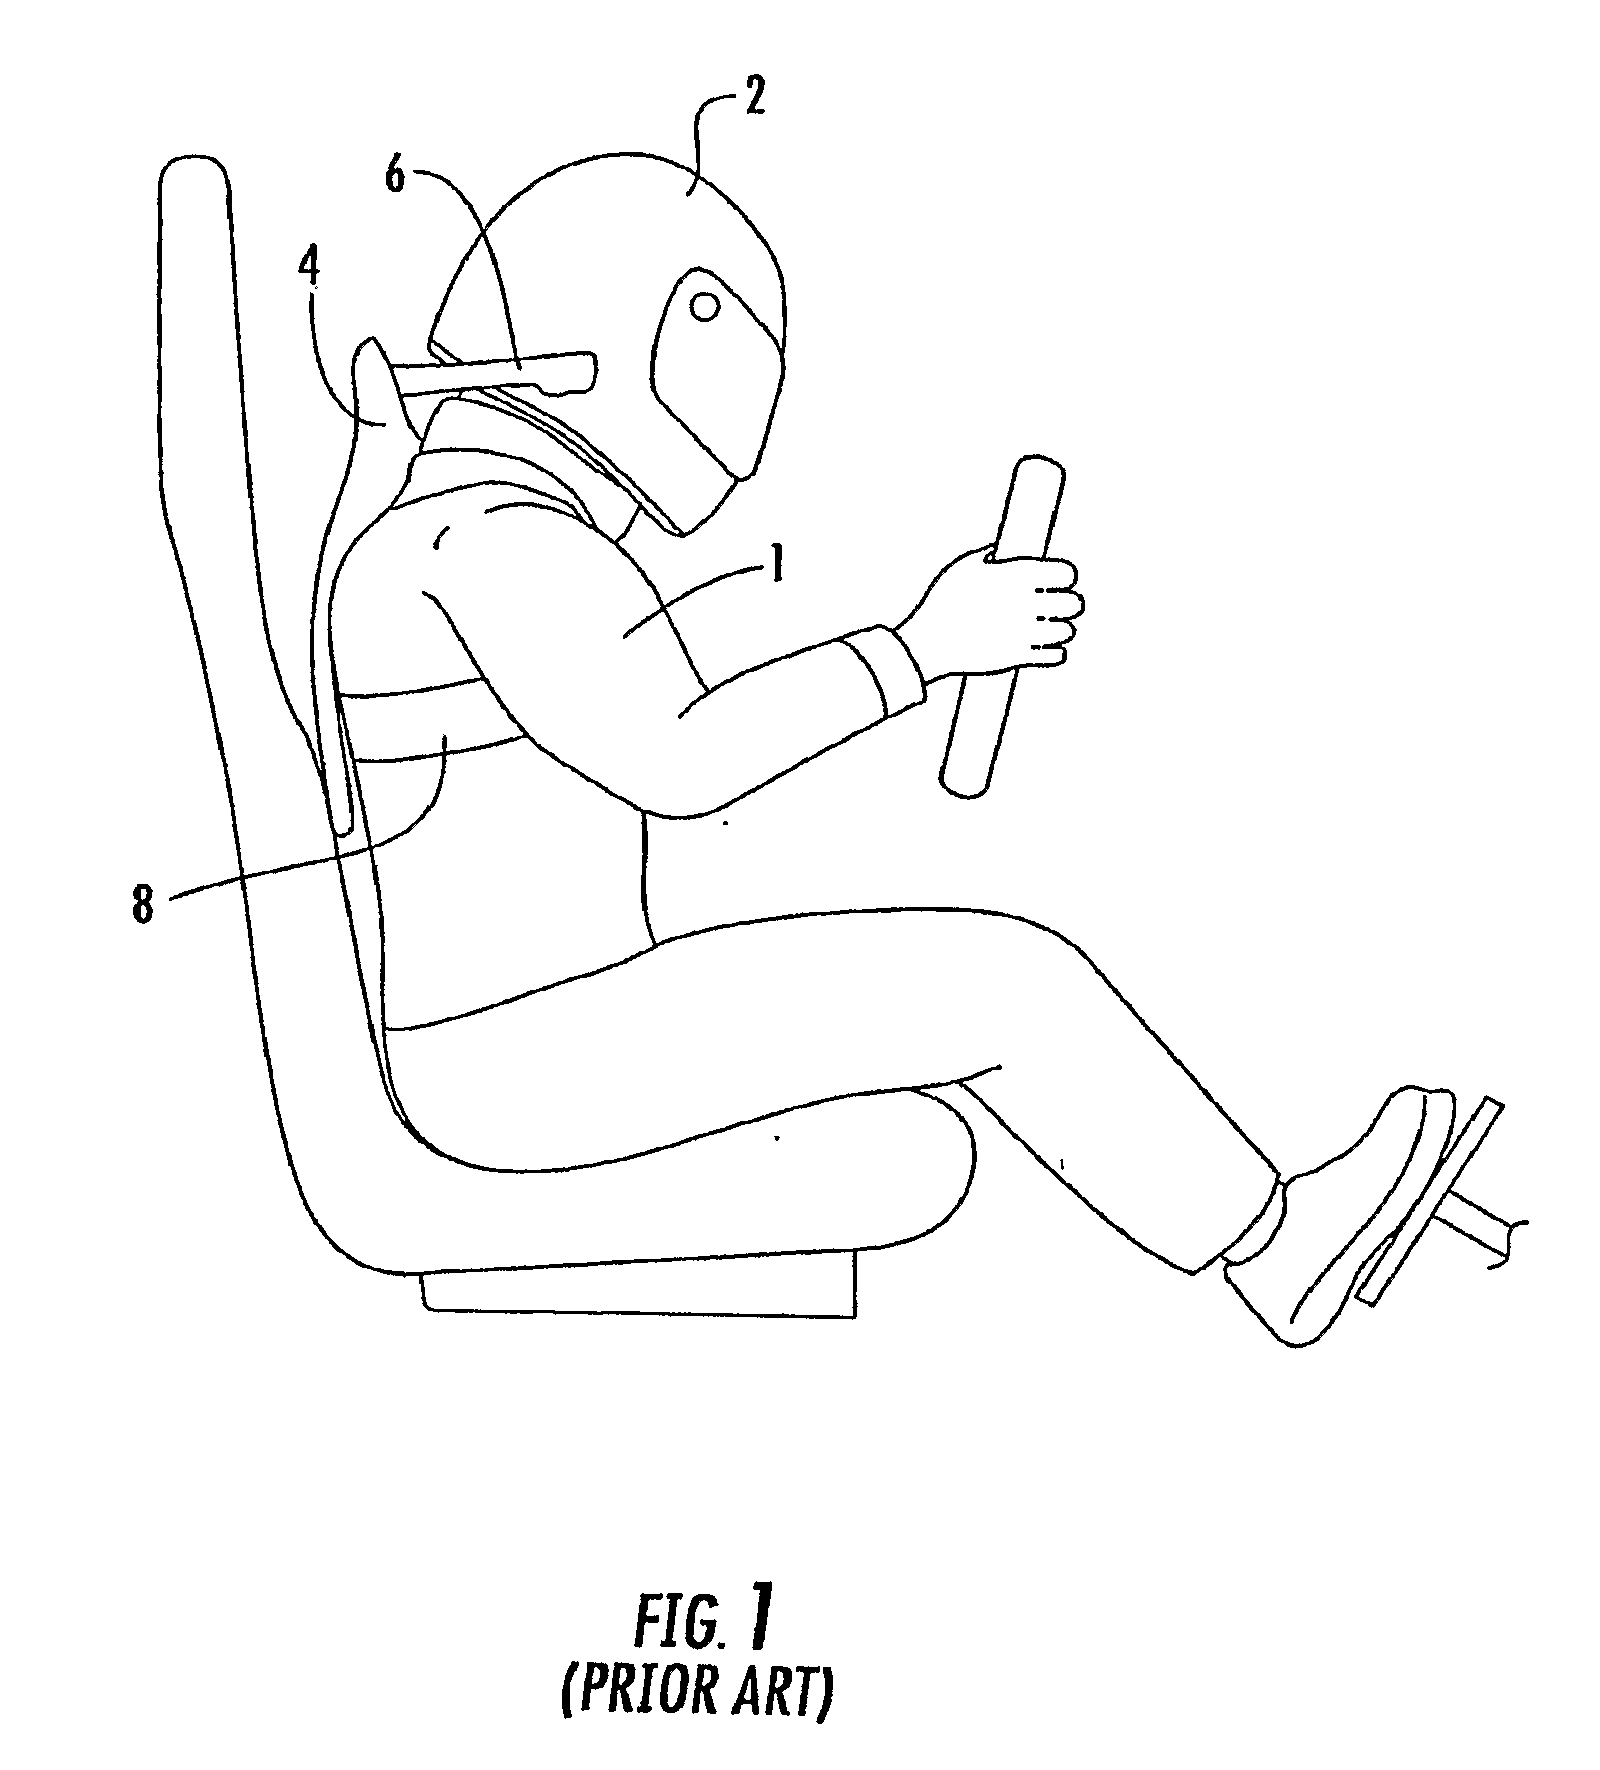 Apparatus for Reducing Brain and Cervical Spine Injury Due to Rotational Movement